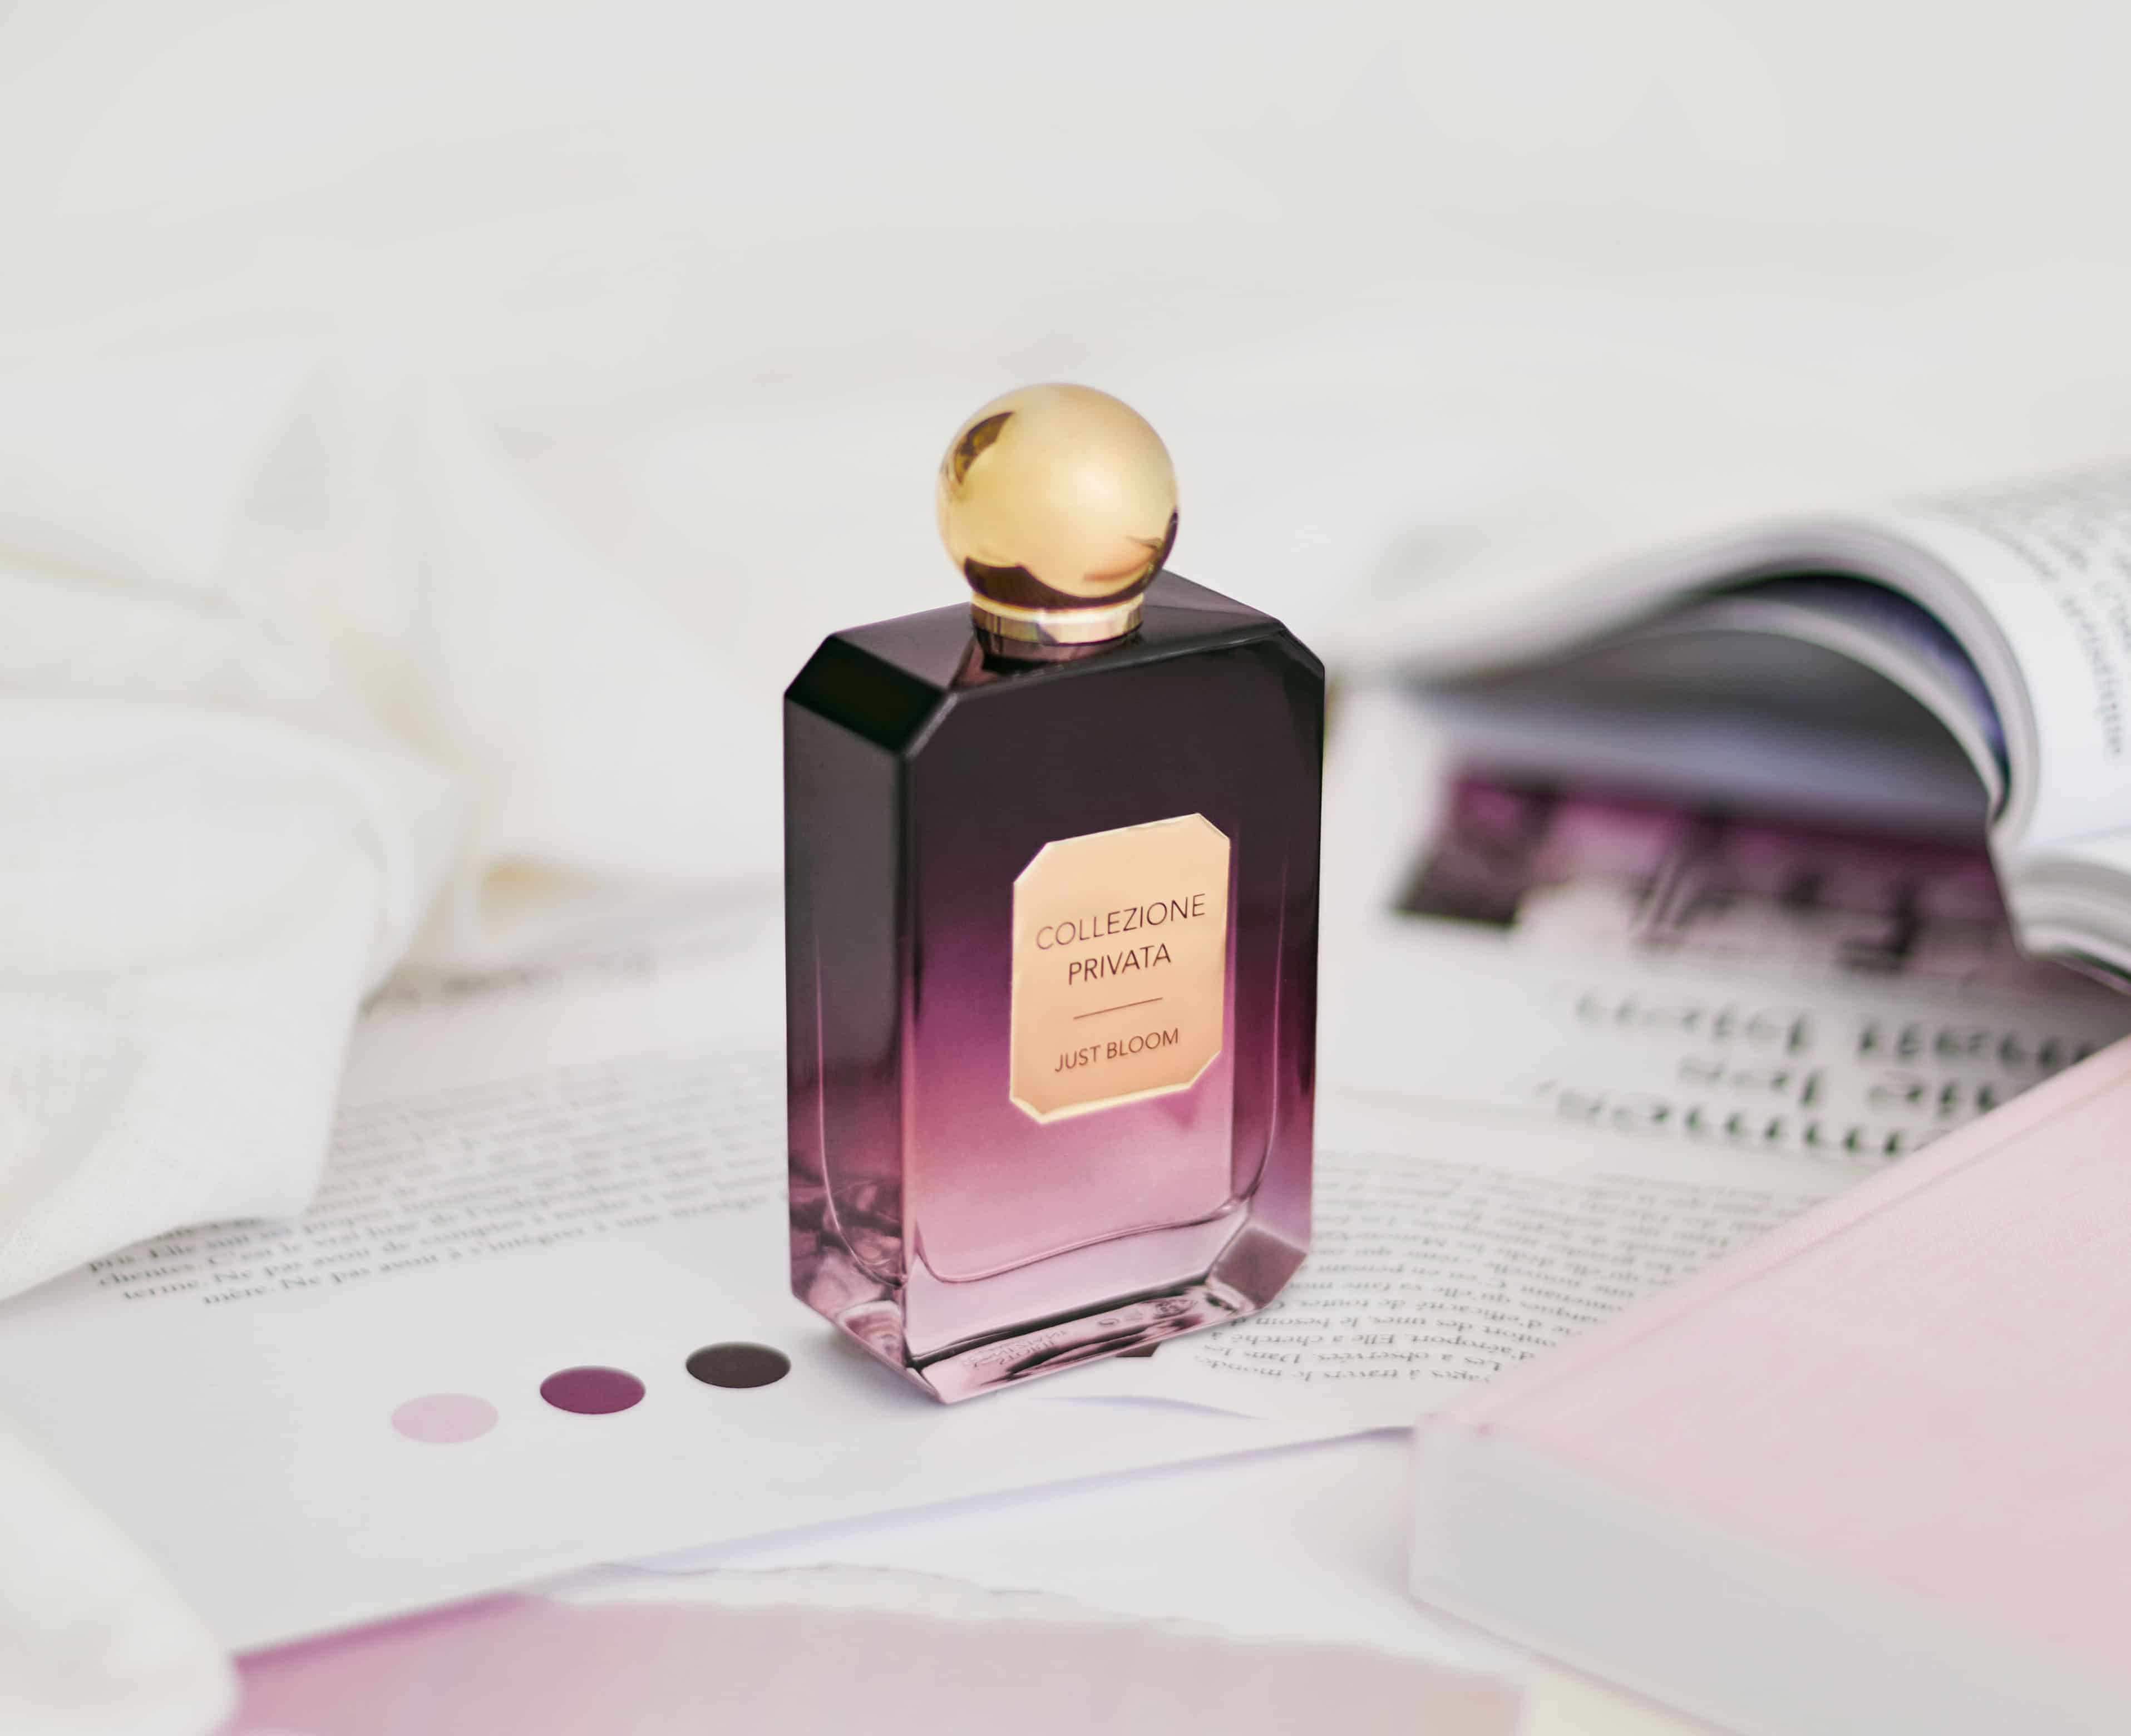 Valmont unveils its new fragrance Just Bloom - Luxus Plus